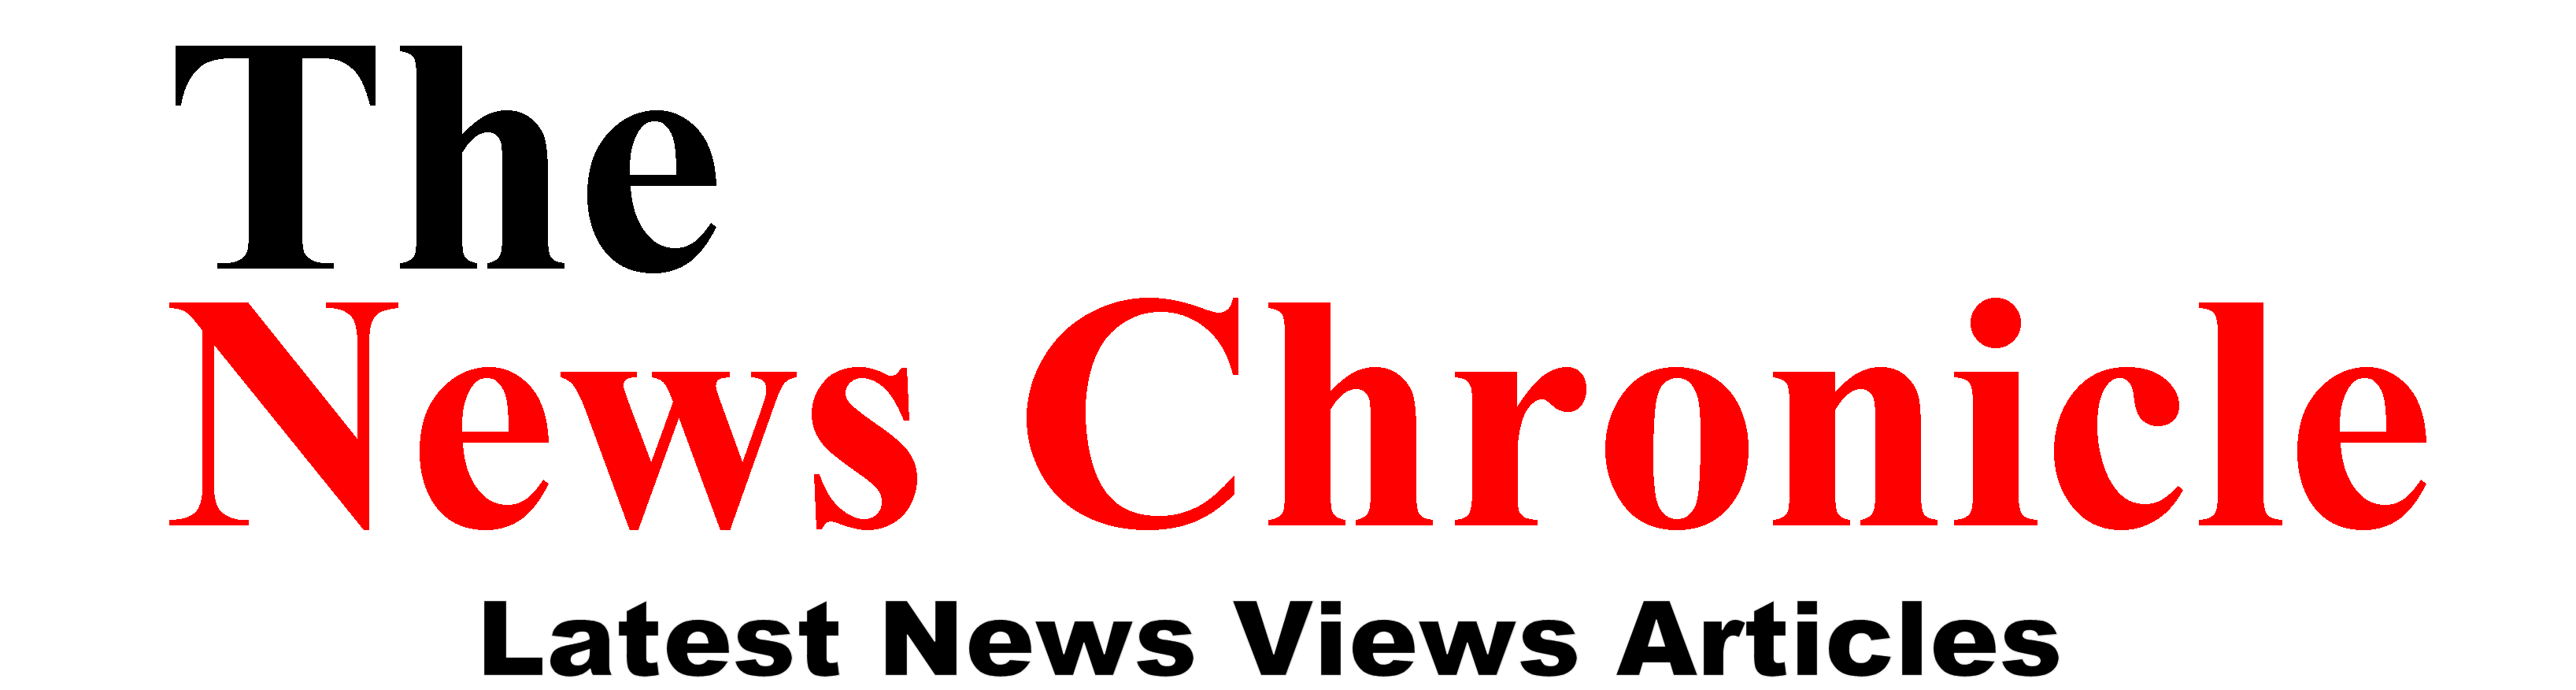 The News Chronicle Latest News Views Articles